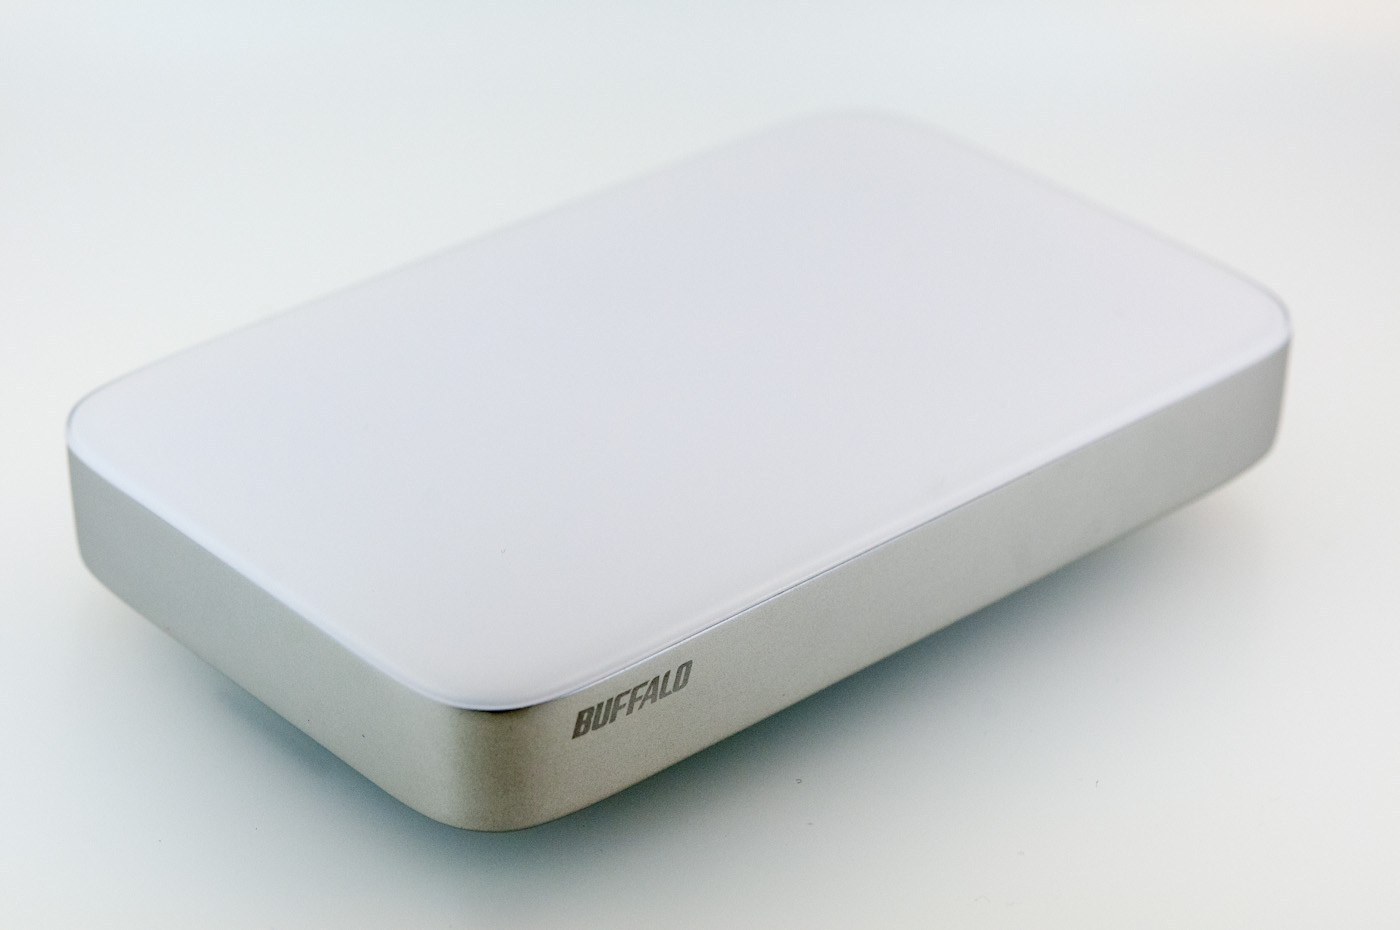 Buffalo MiniStation Thunderbolt Review An External with USB and